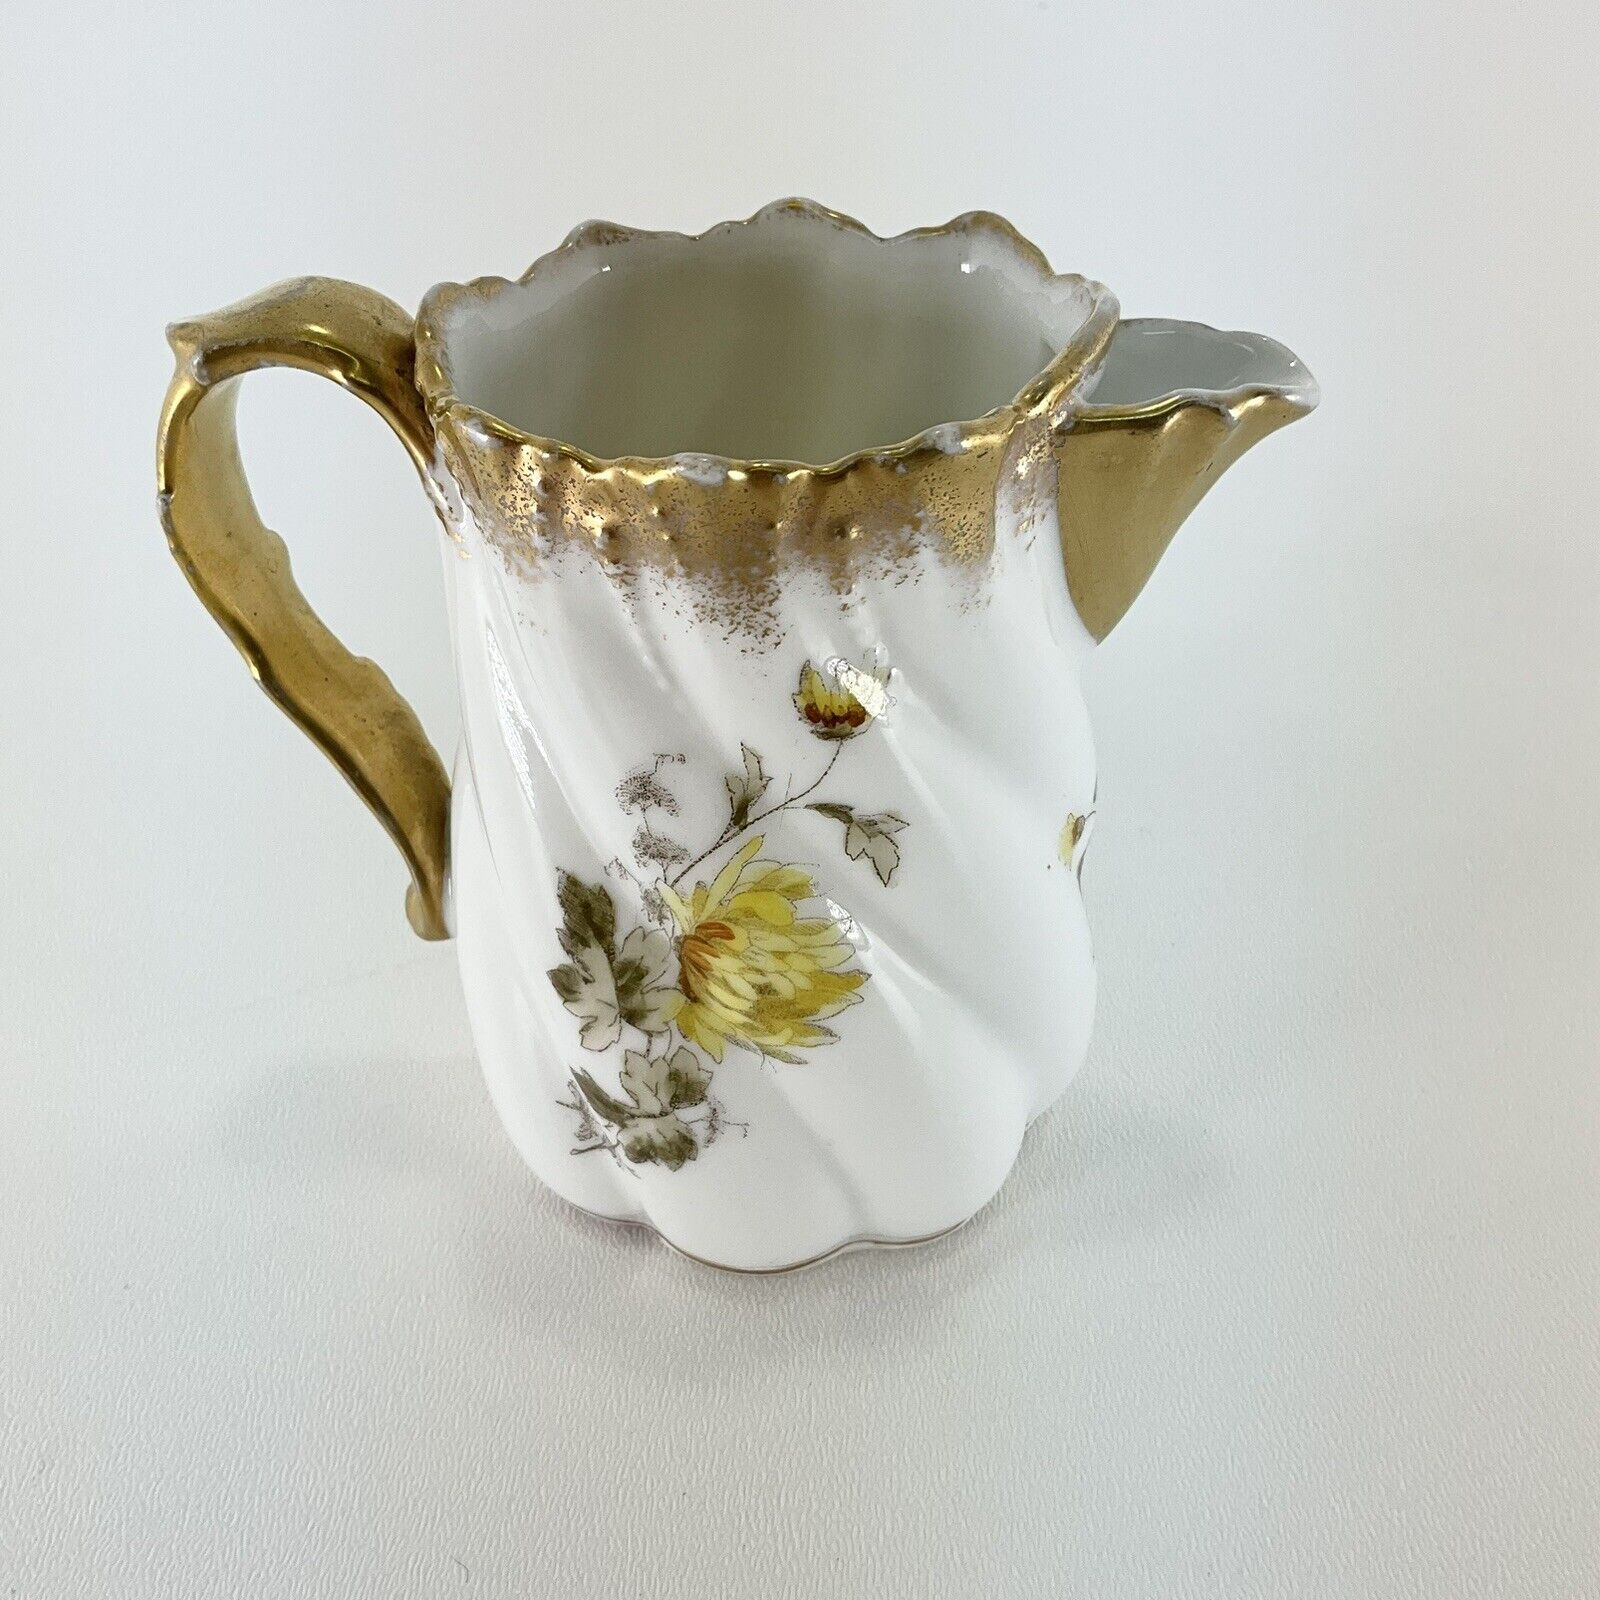 Vintage Limoges Porcelain Creamer  With Yellow Flower With Gold Trim  France